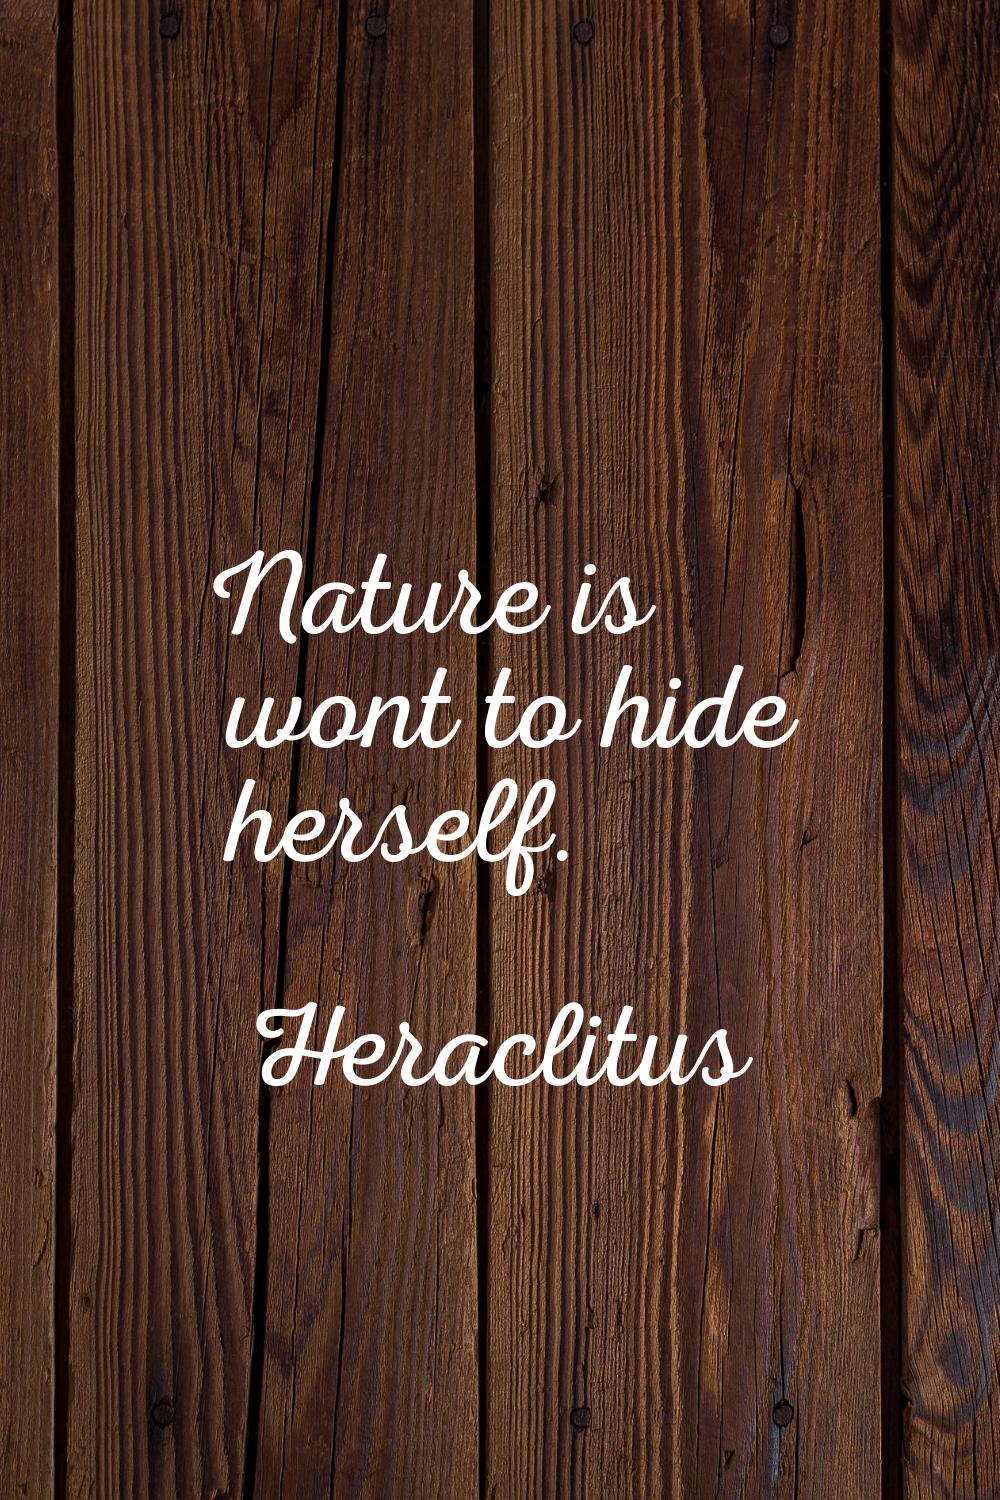 Nature is wont to hide herself.